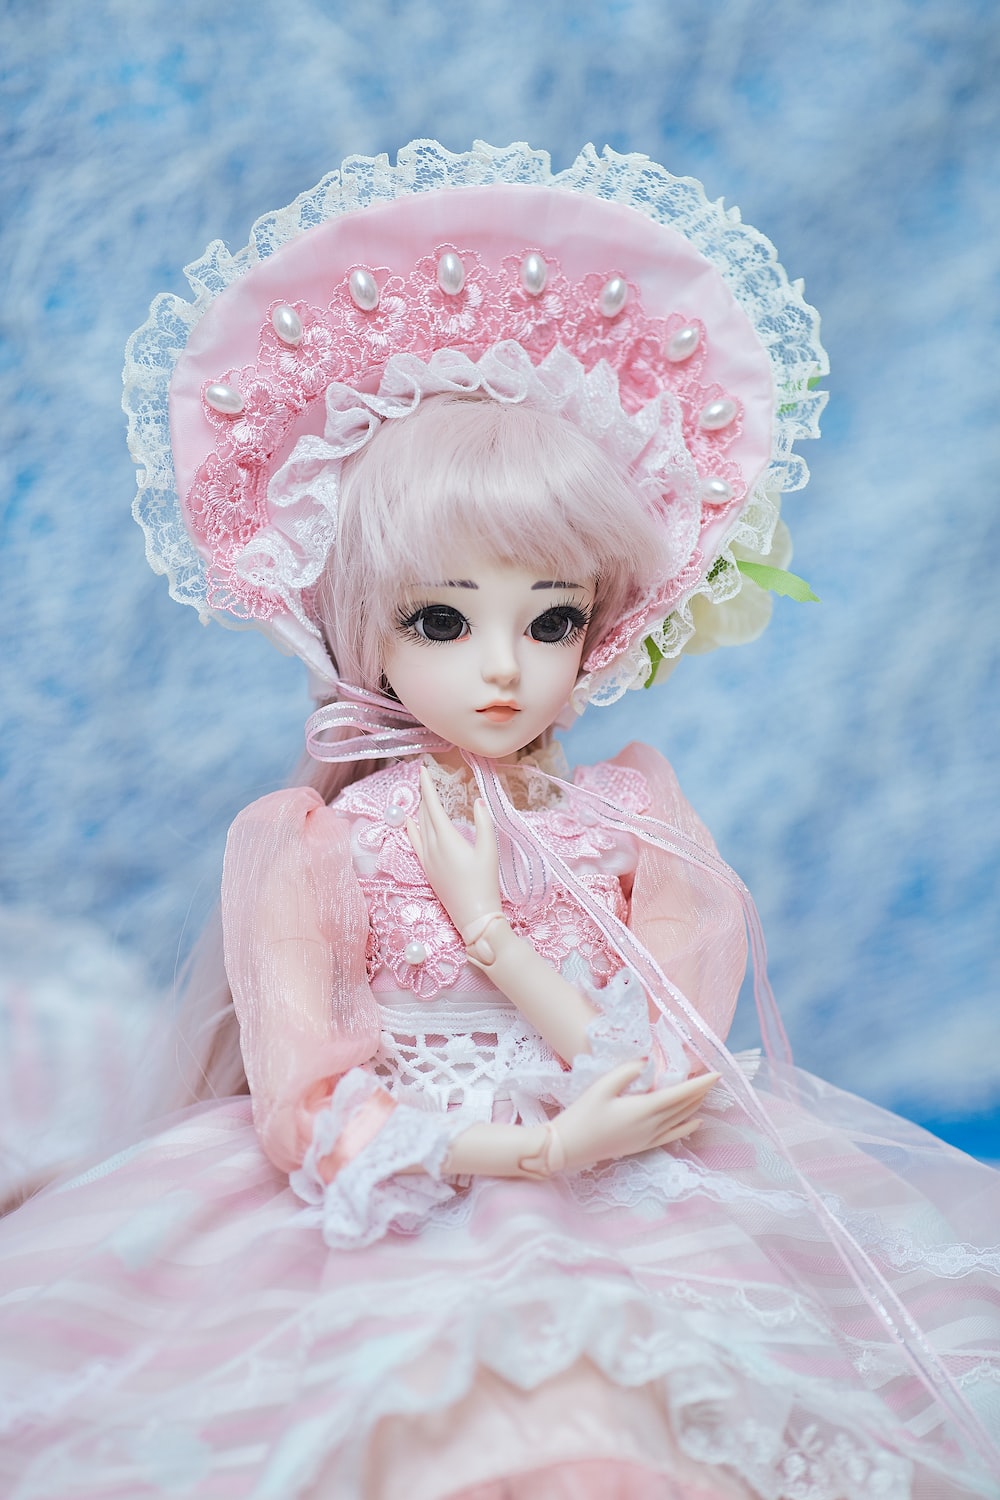 Doll Photo. Download Free Image